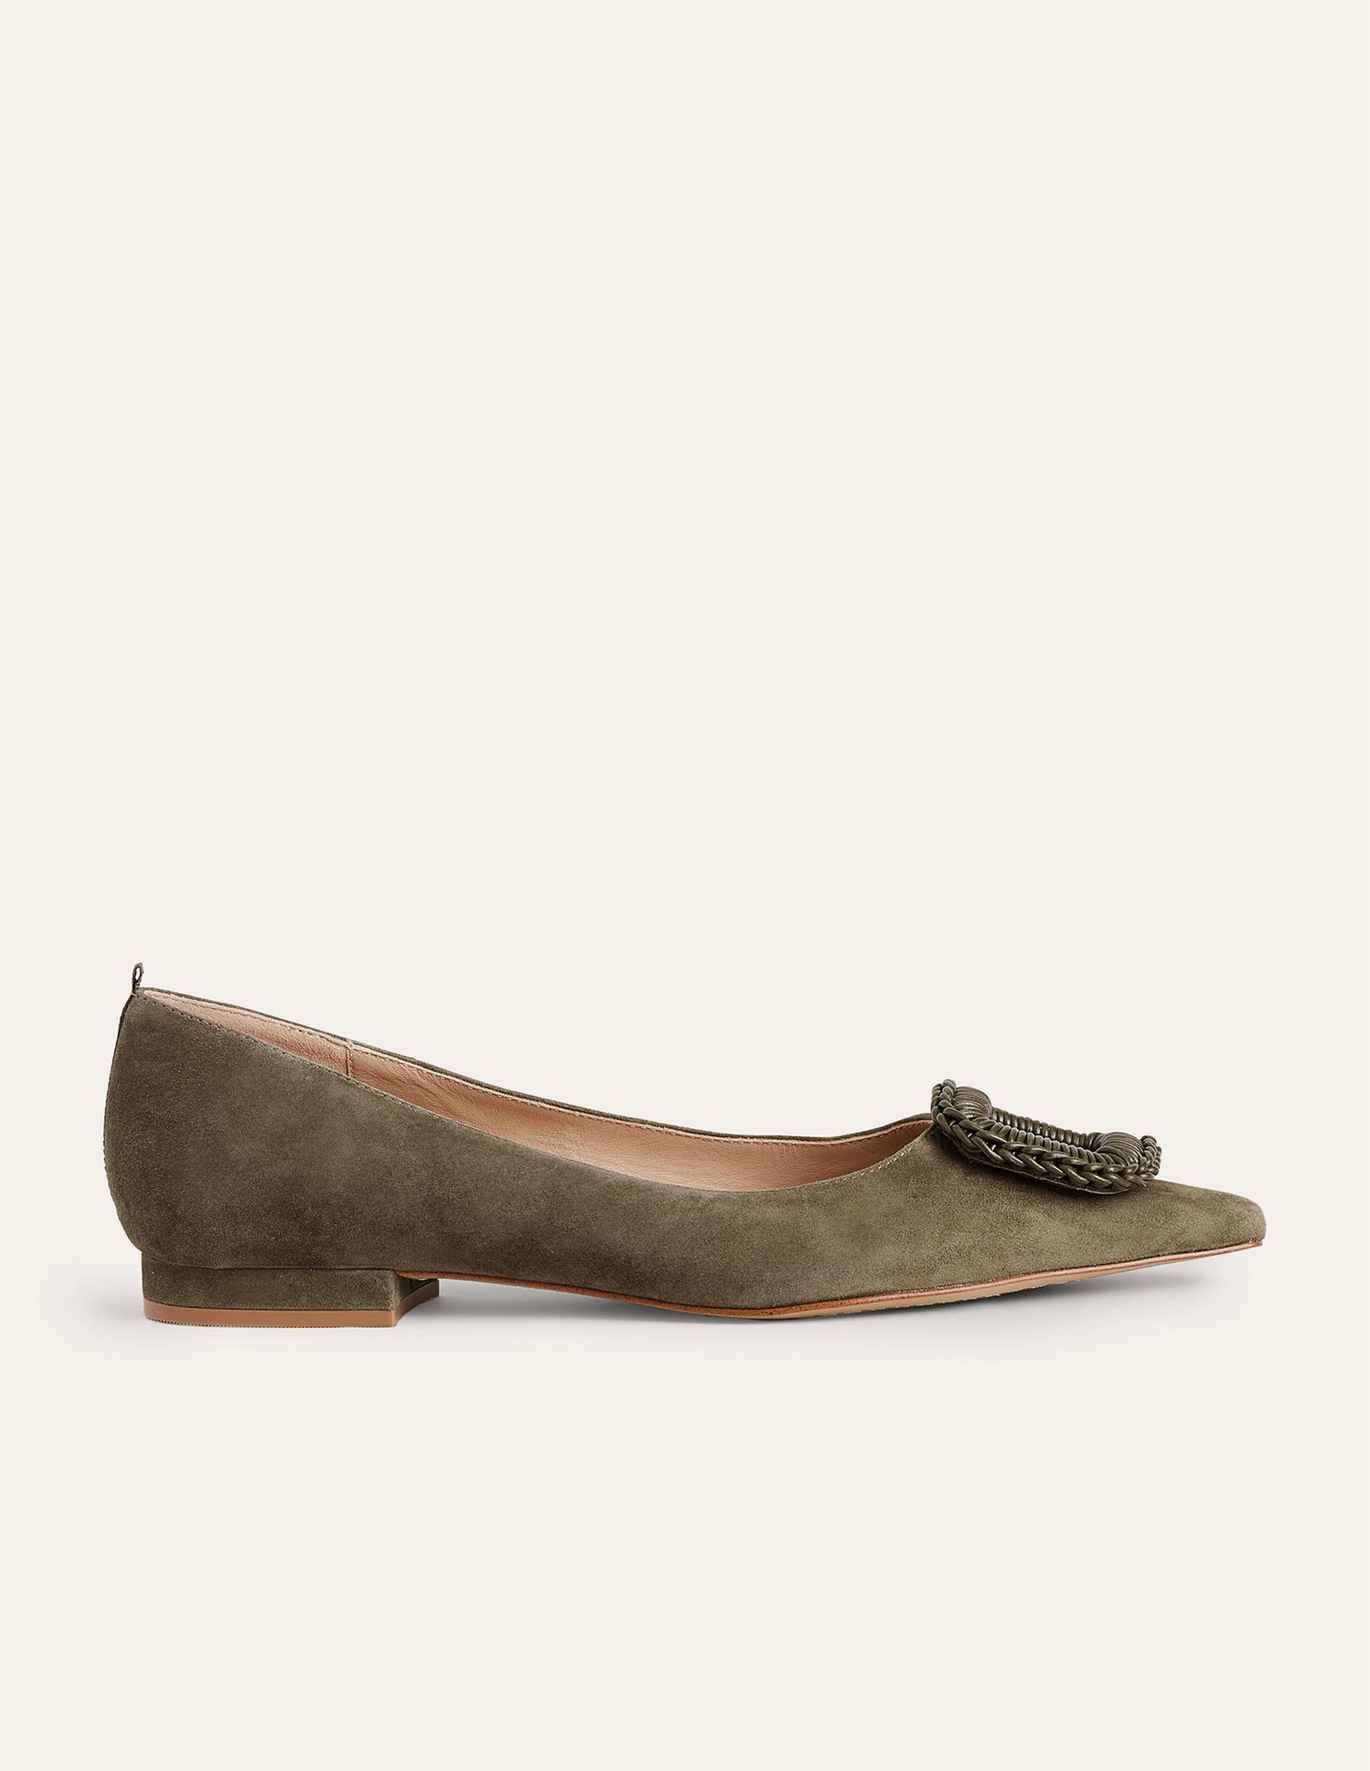 Boden Pointed Ballet Flats - Deep Olive Suede